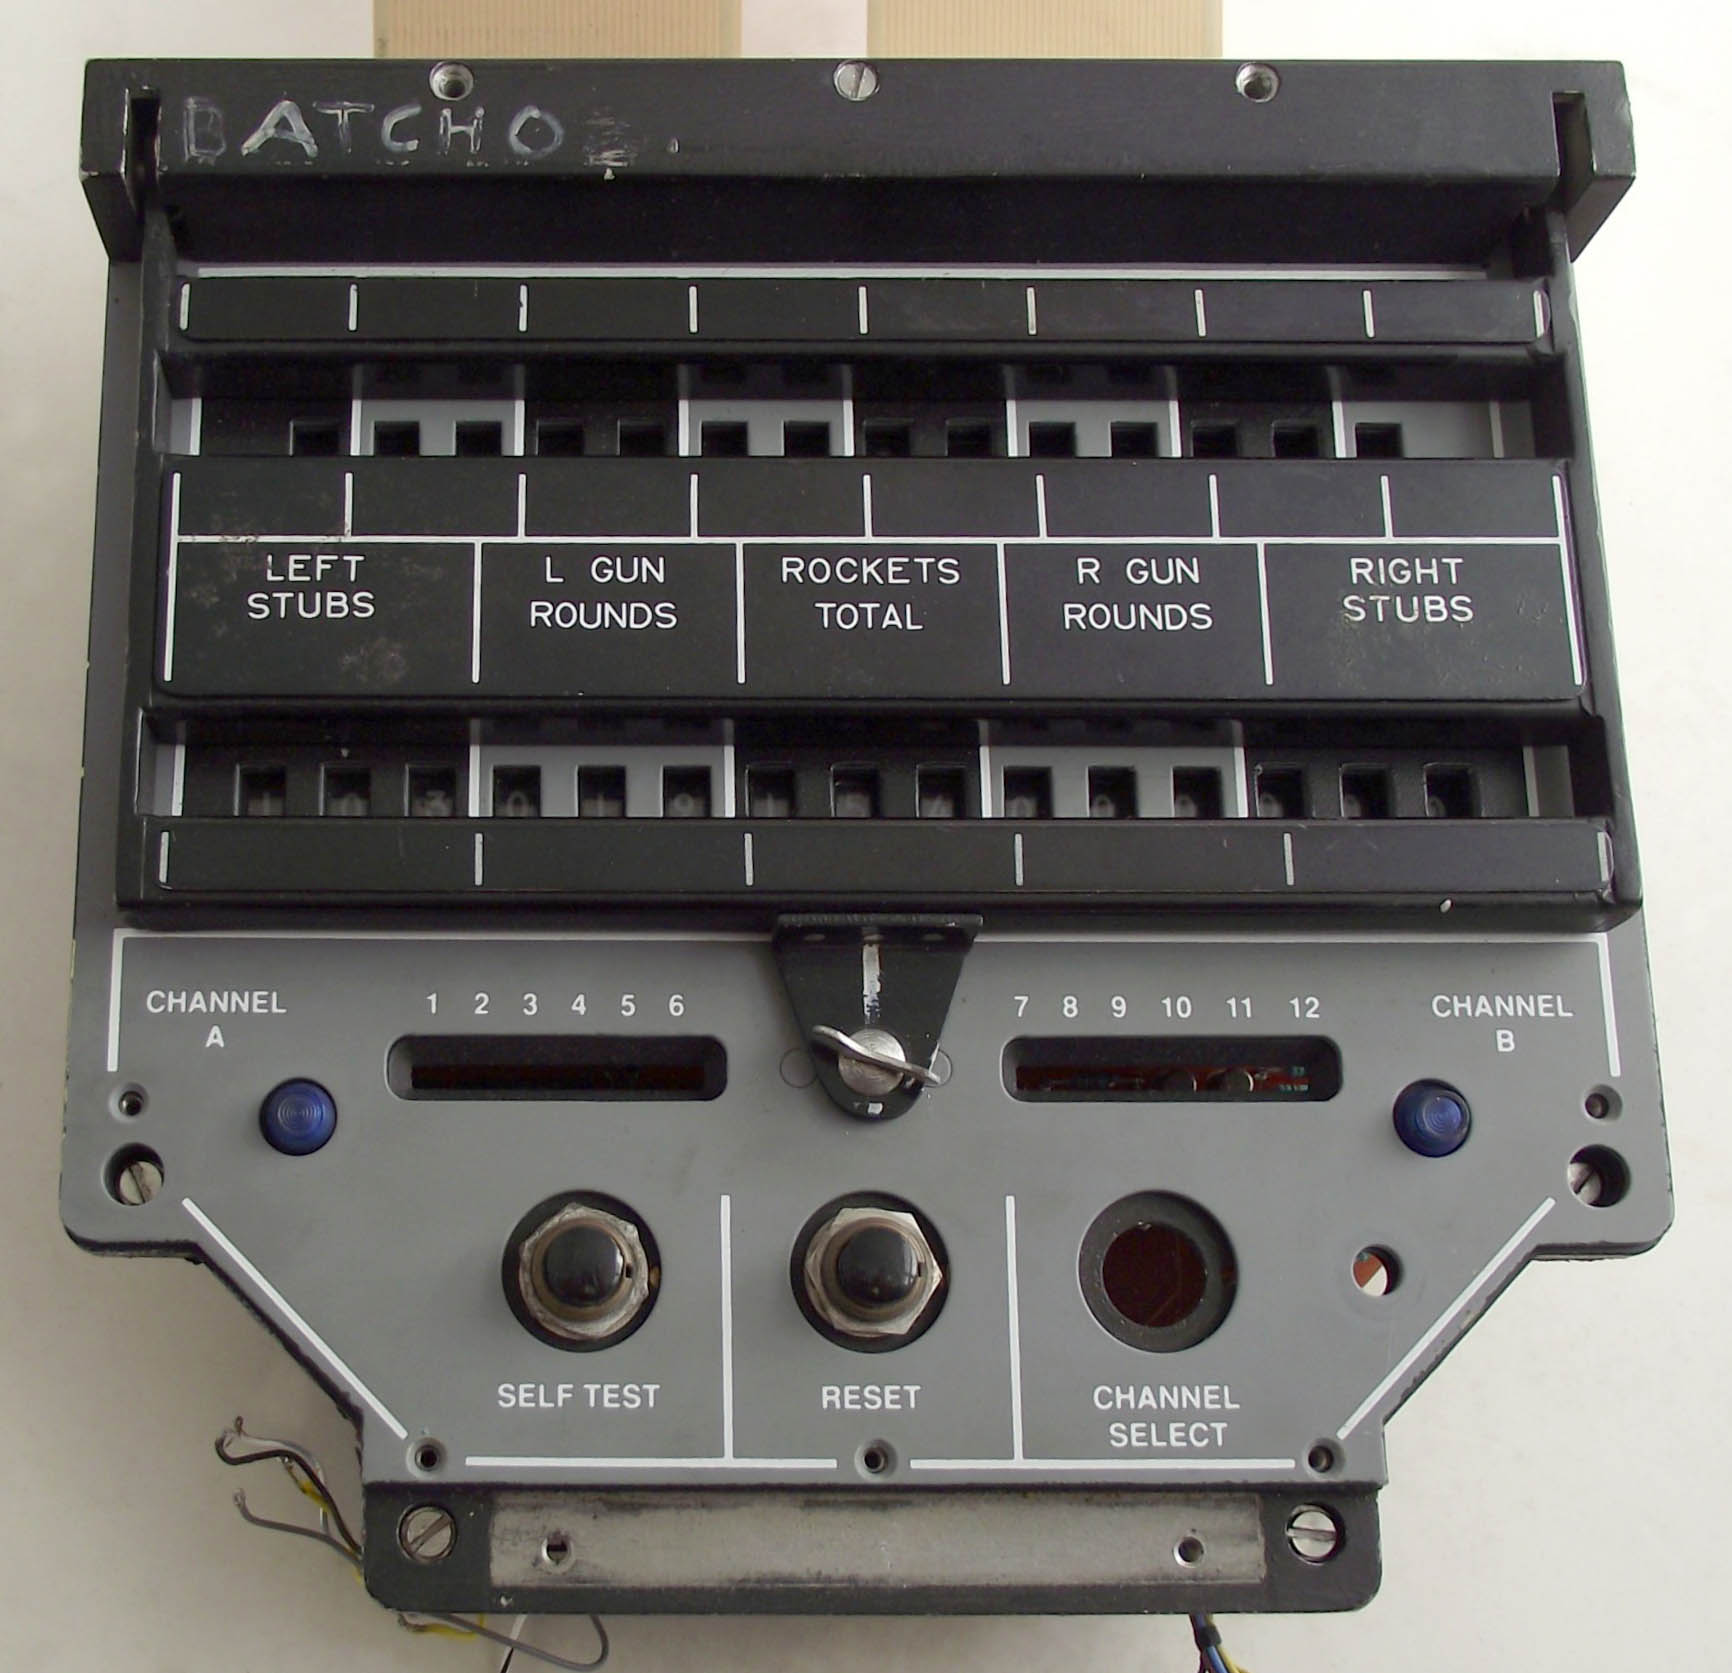 Tornado SMS Weapon Programming Unit's Front Panel